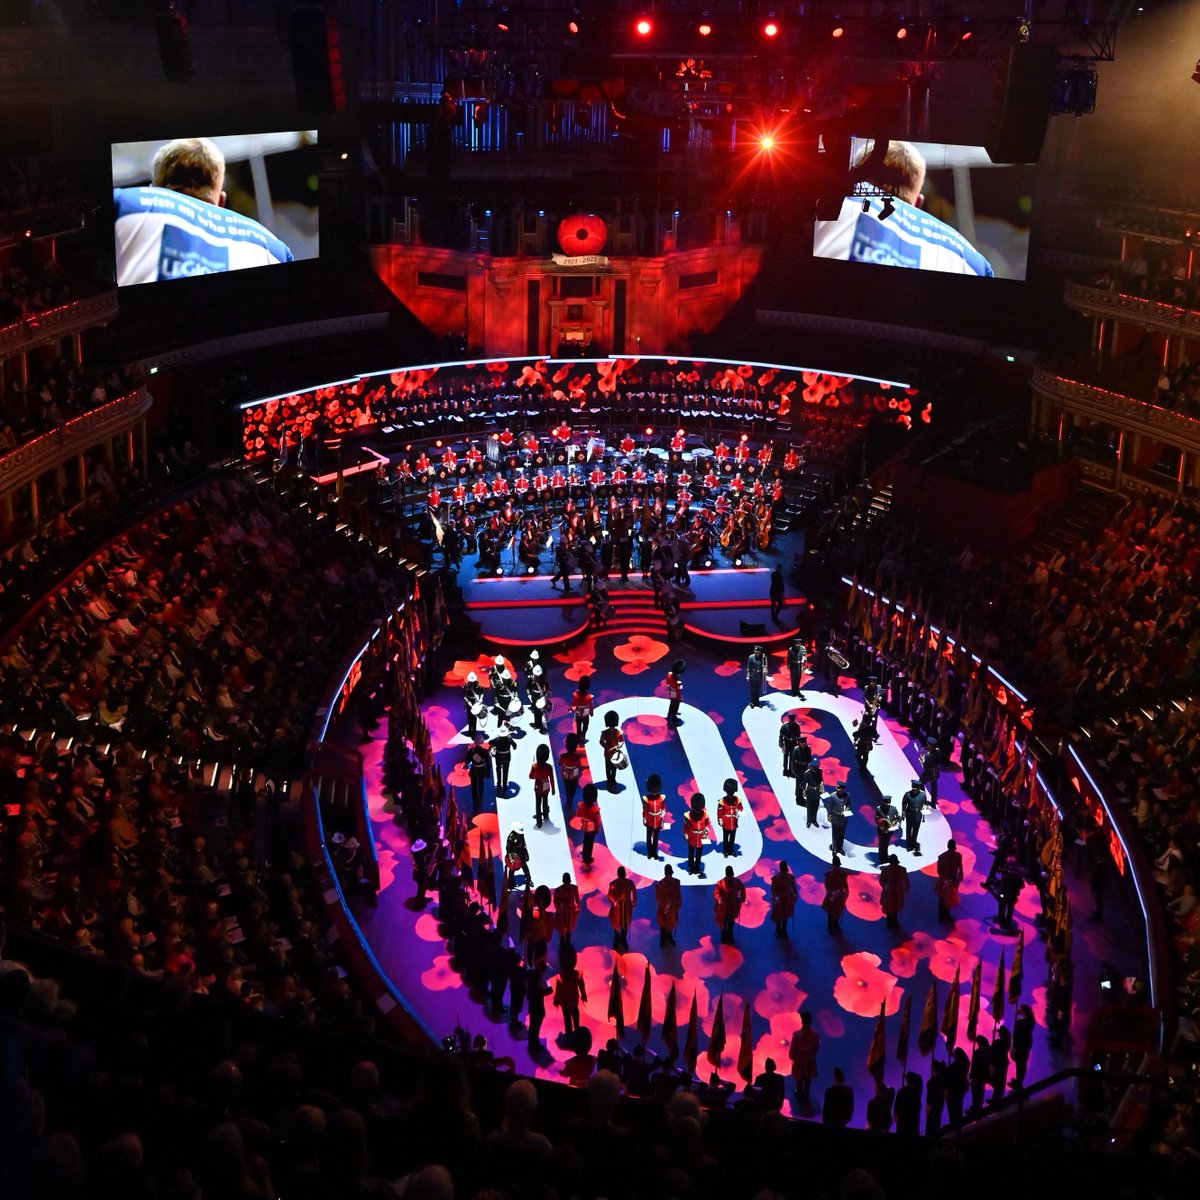 In our centenary year the fantastic @RoyalMarines drummers get the #FestivalOfRemembrance underway.